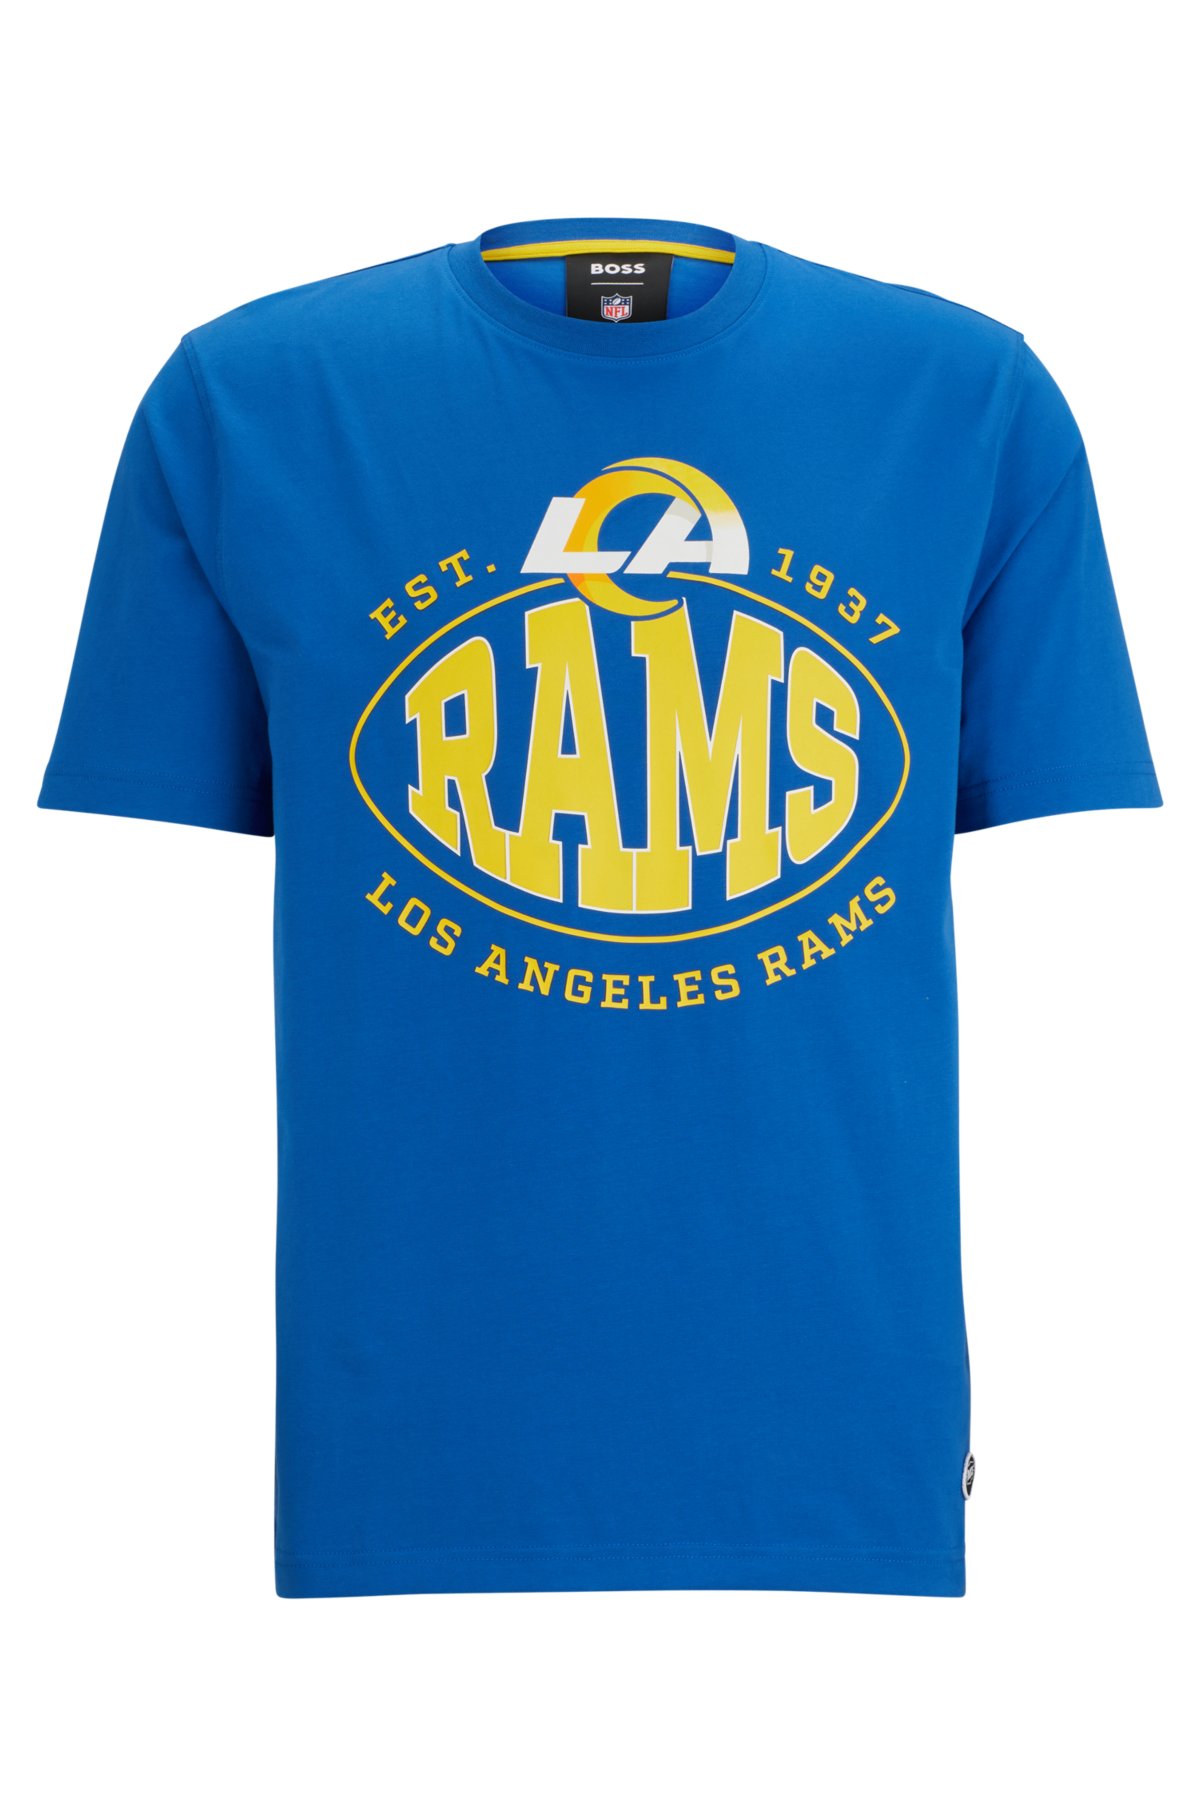 PHOTOS: Rams third jersey capsule collection